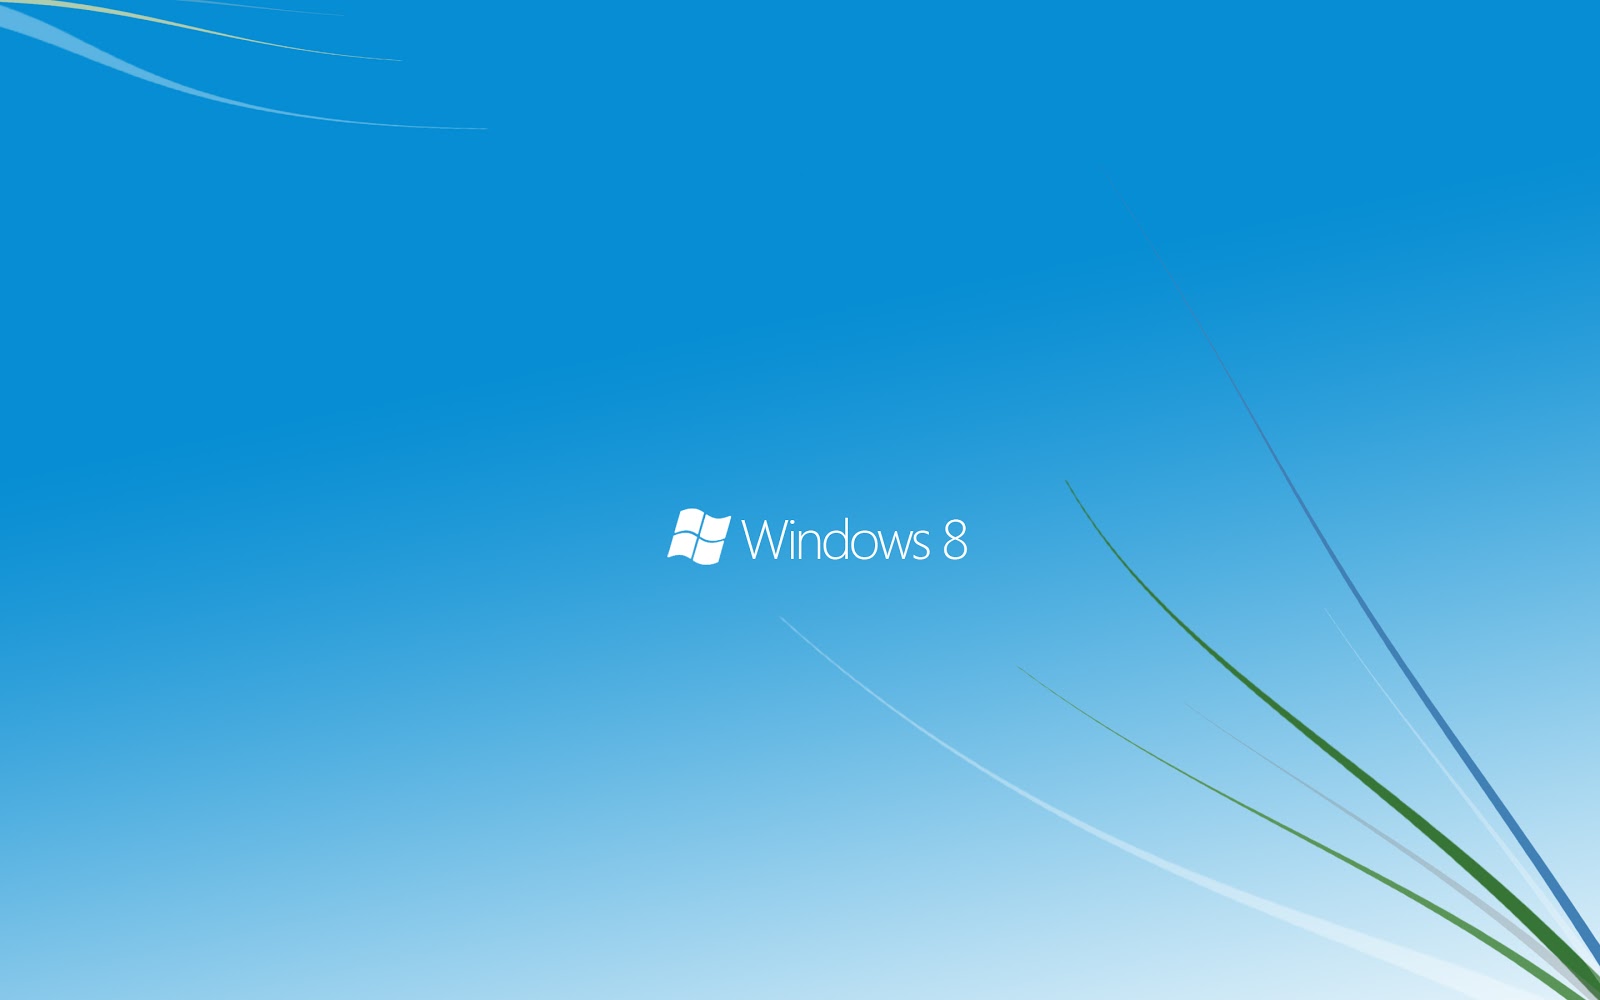 Windows 8 Wallpapers Collection 2013 Windows Server 2012 System